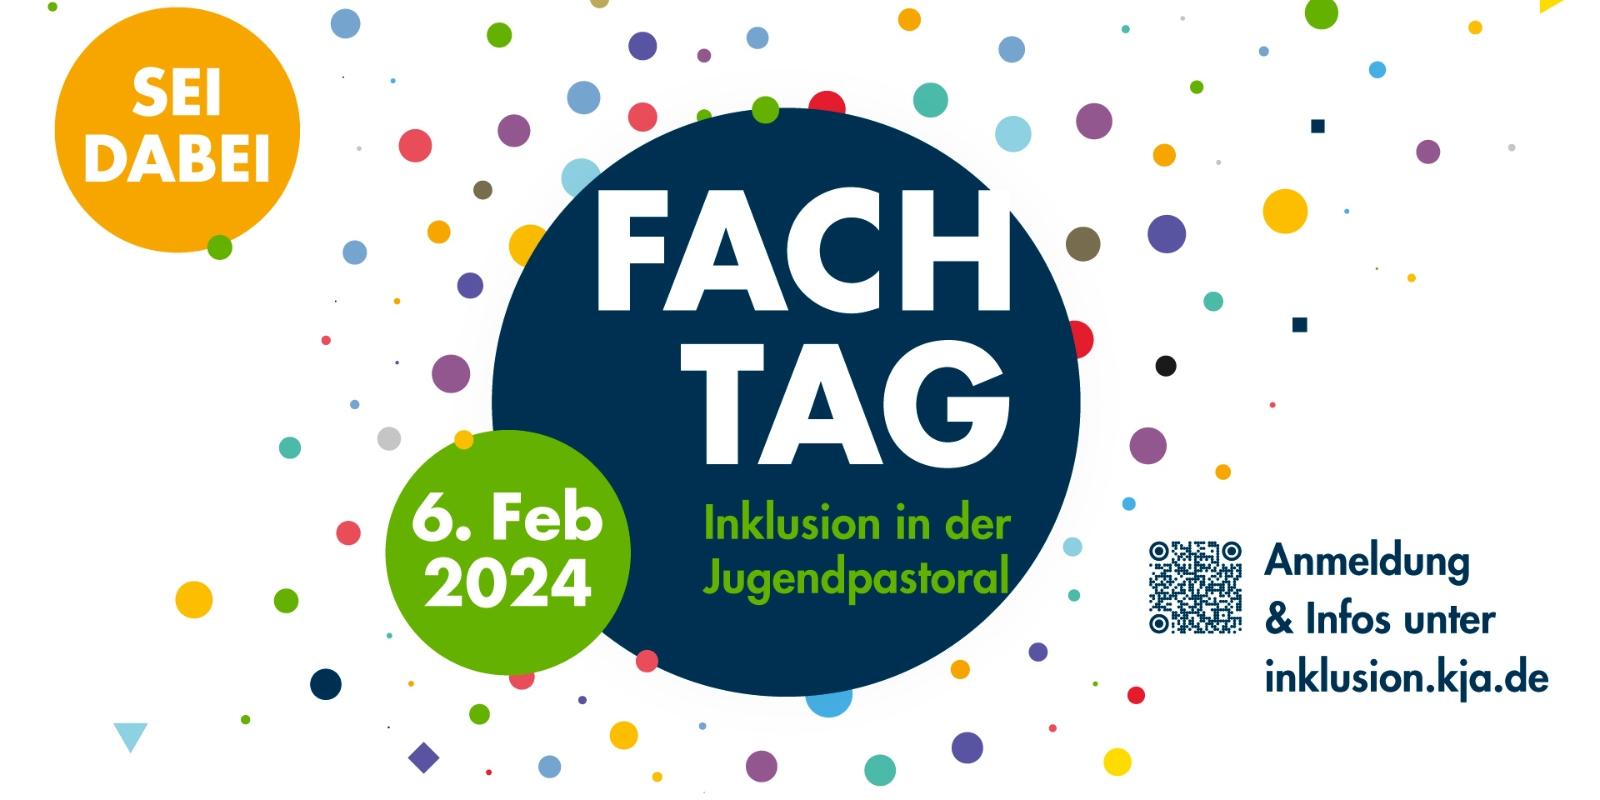 Save the date – Fachtag Inklusion am 6. Februar 2024